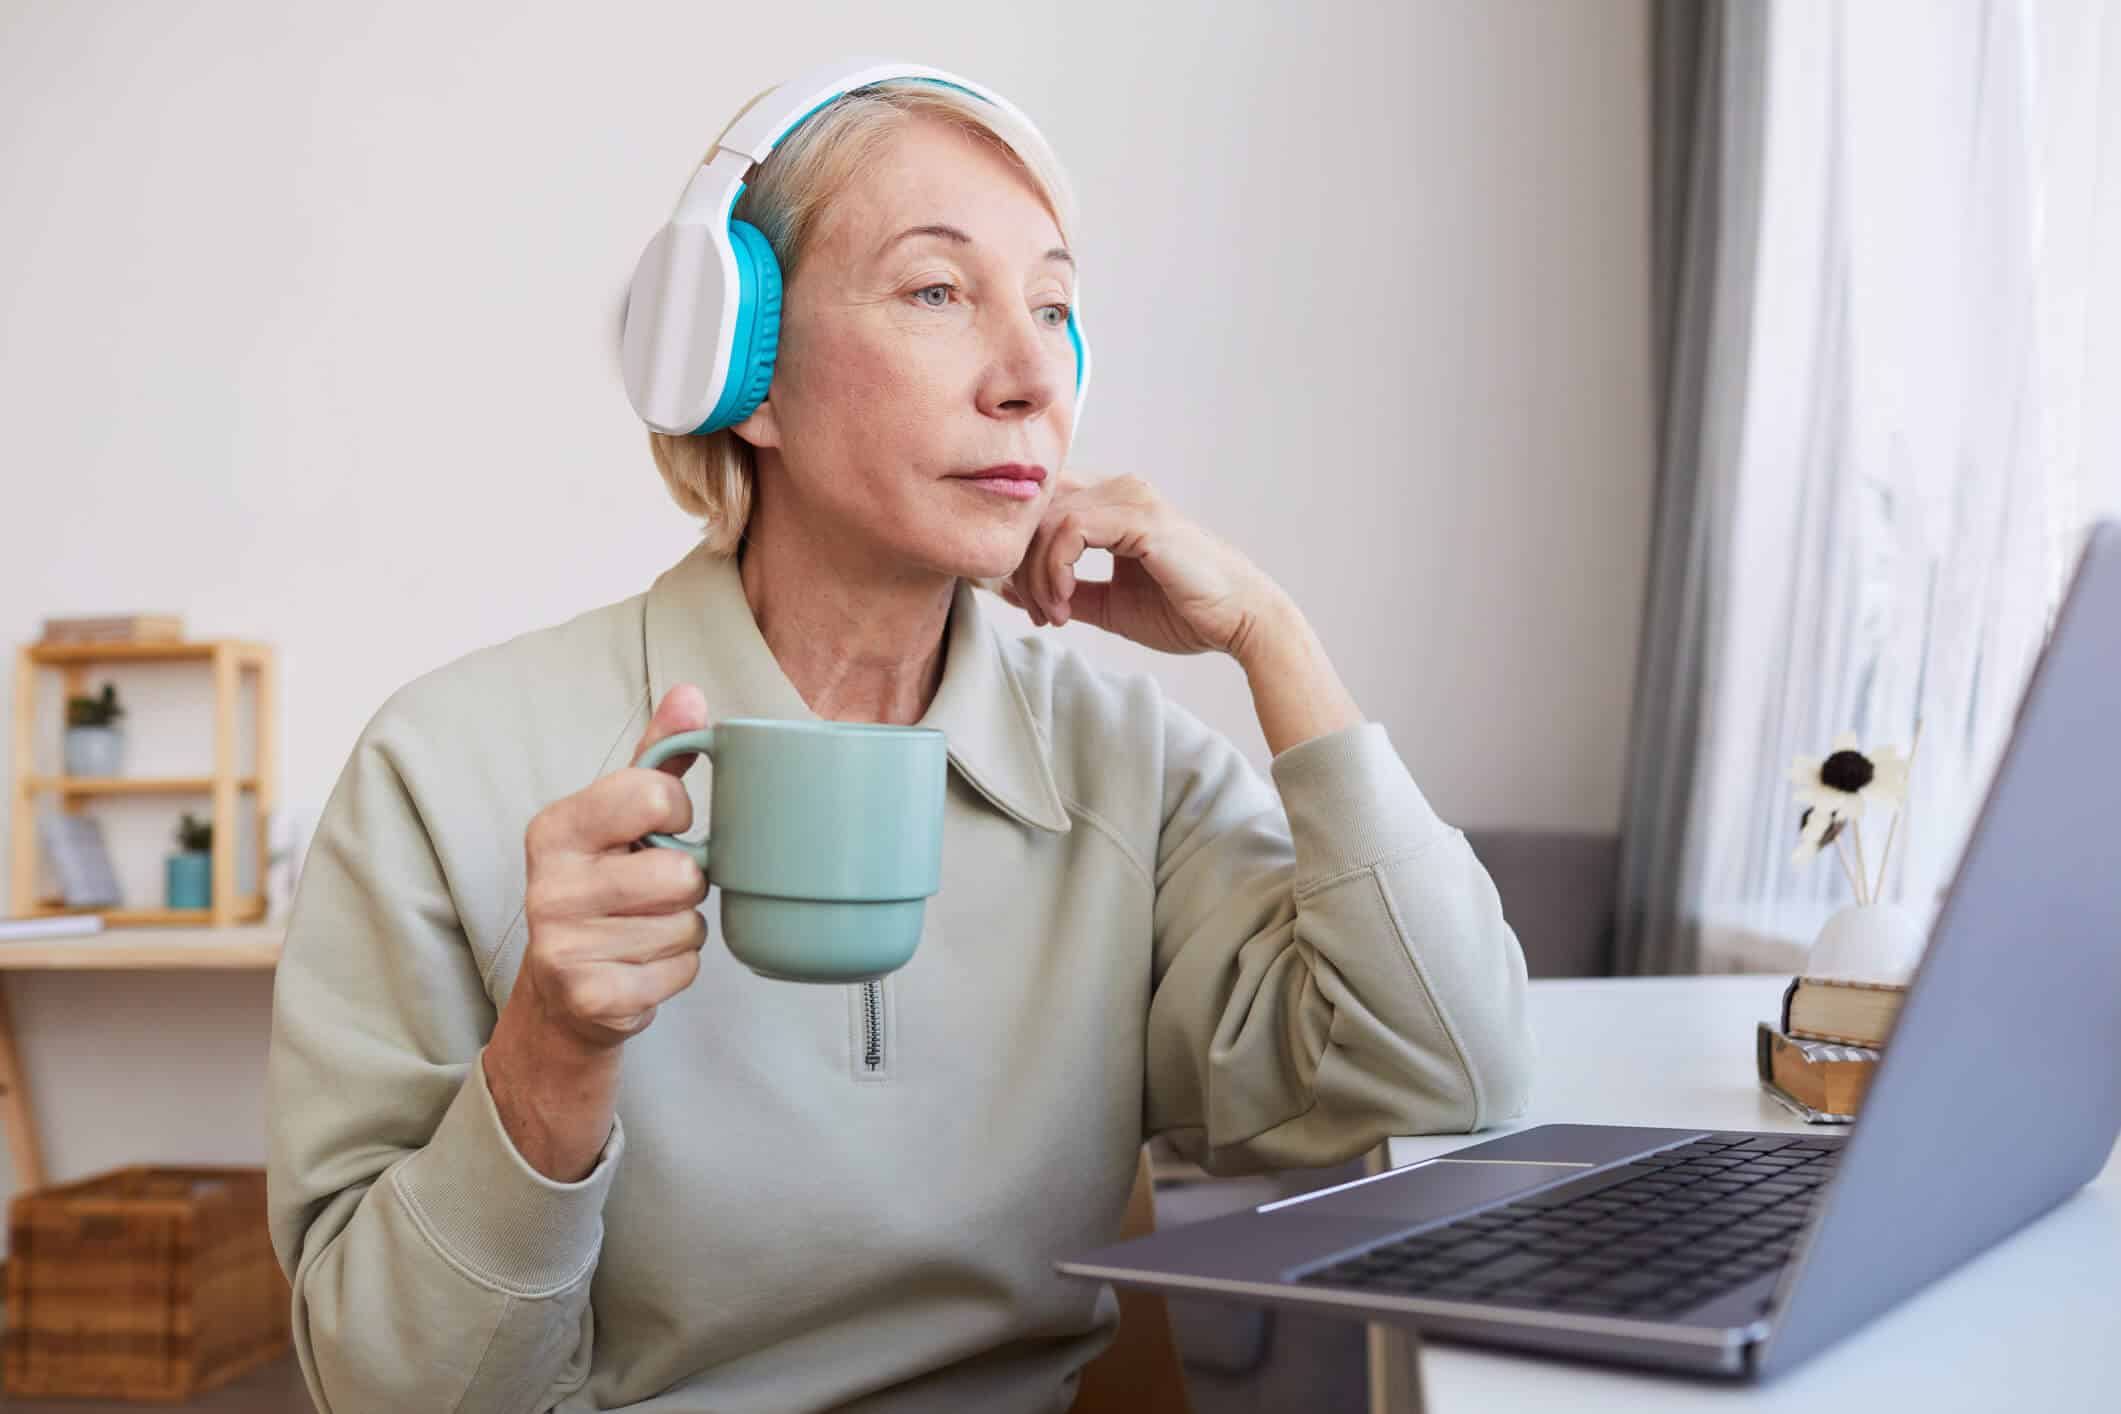 An elderly woman wearing headphones sitting in front of a computer while holding a coffee mug